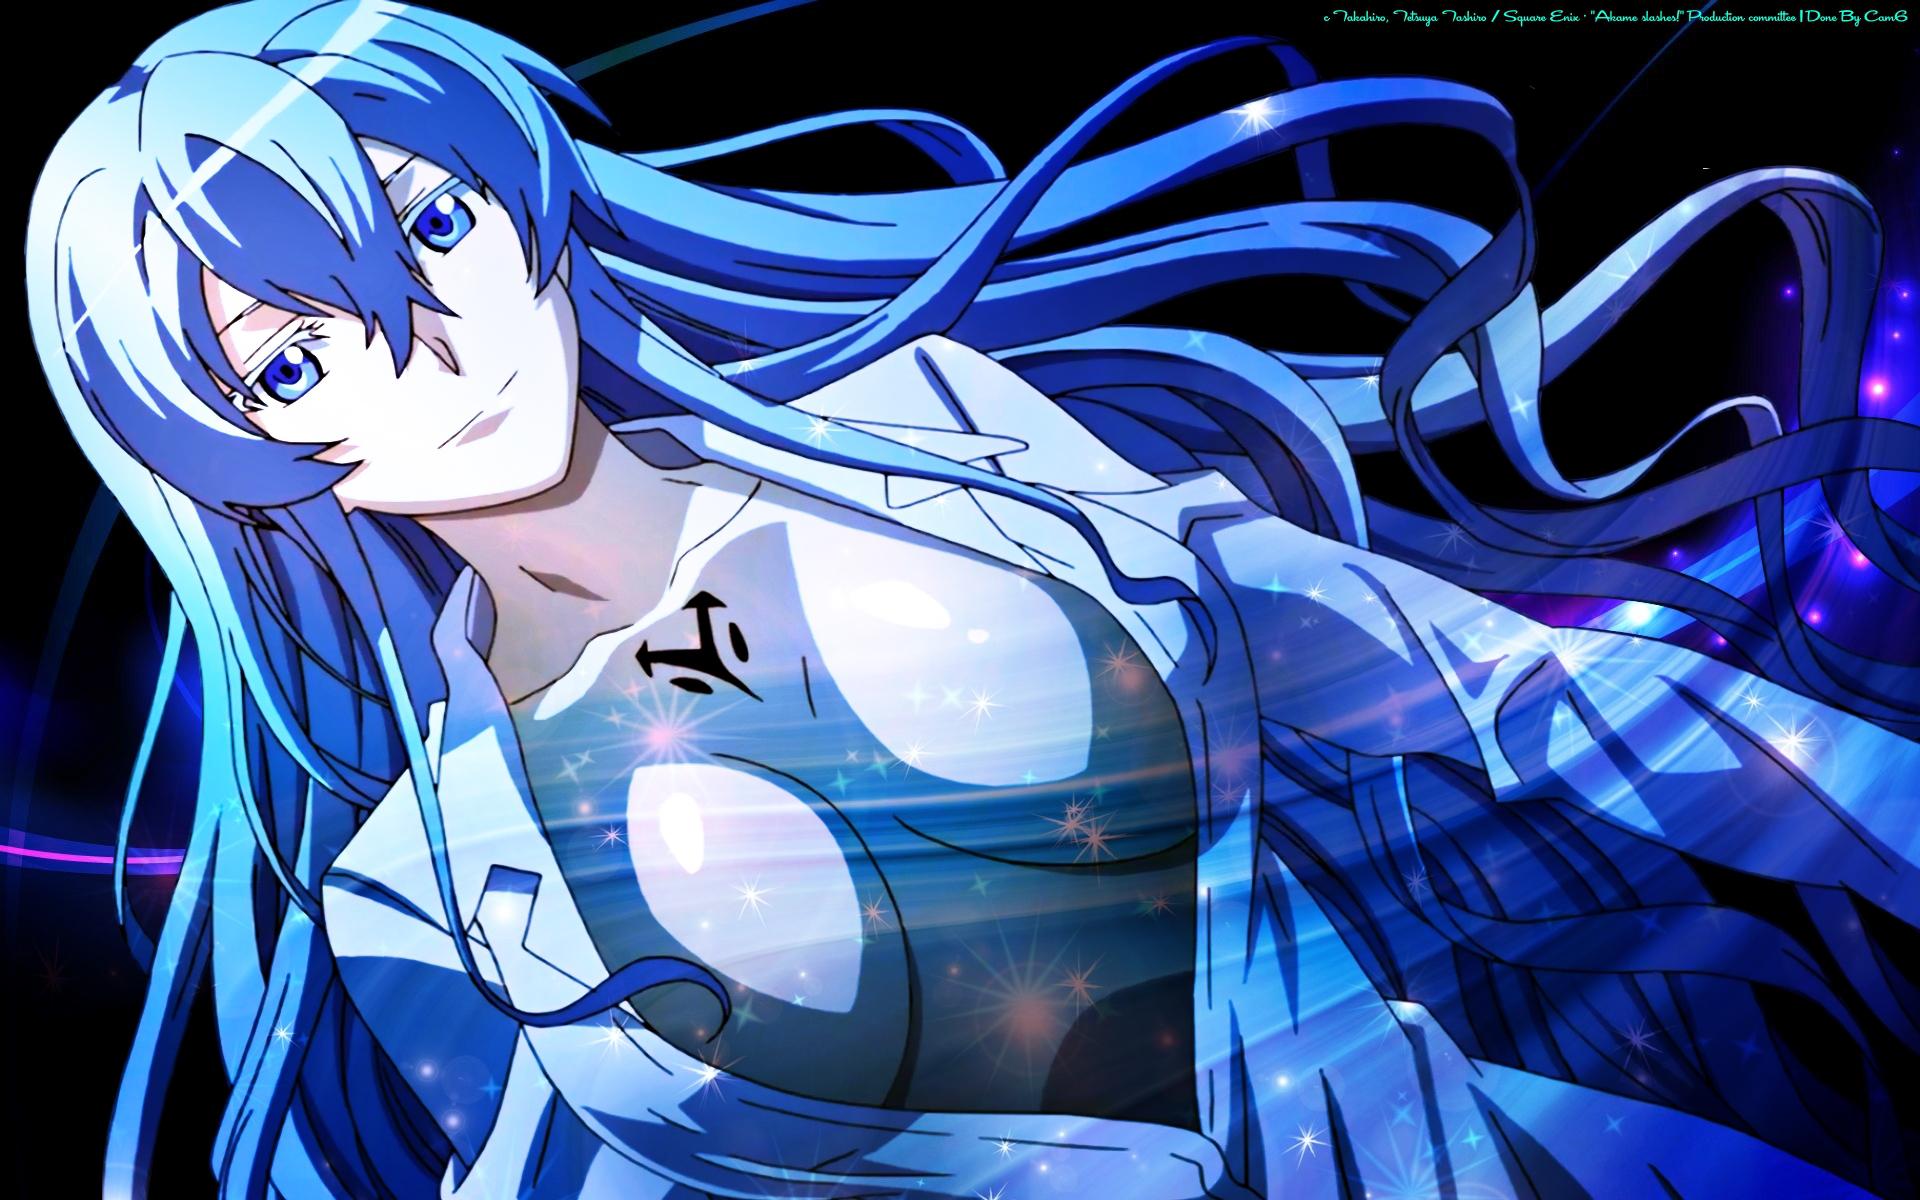 Esdeath Ga Kill Wallpaper Done By Me Rendered by MG Anime Renders